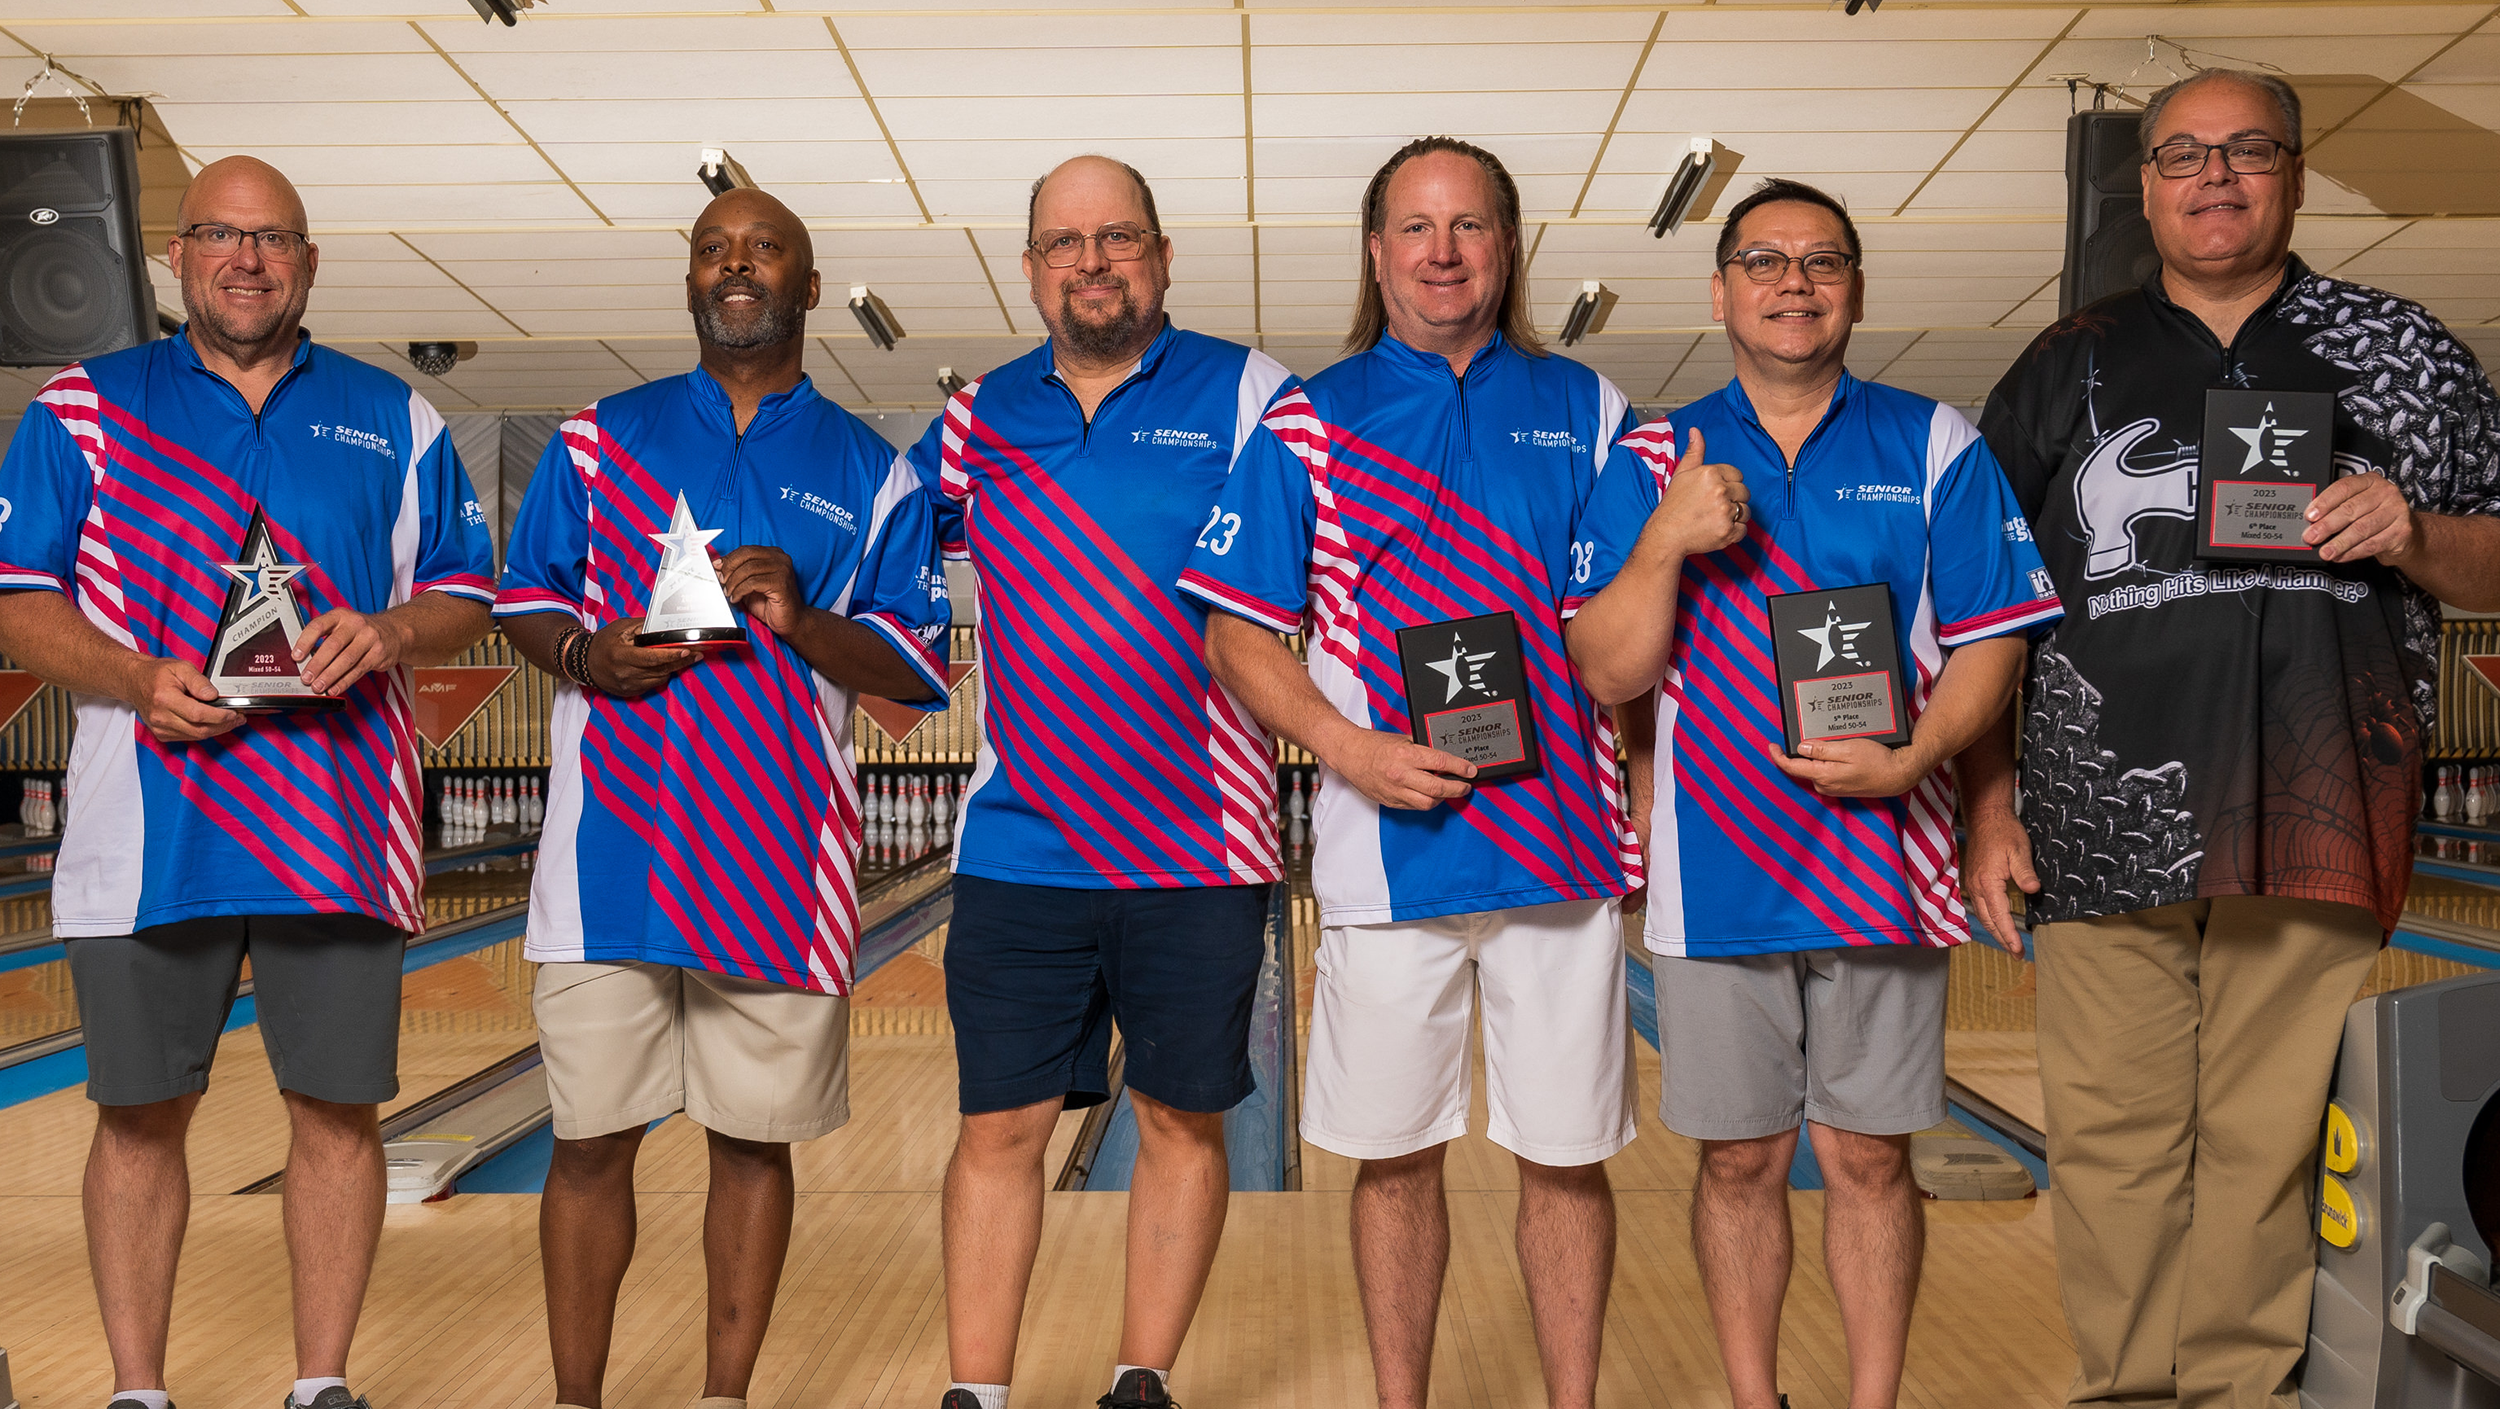 The top six finishers in Mixed 50-54 at the 2023 USBC Senior Championships.